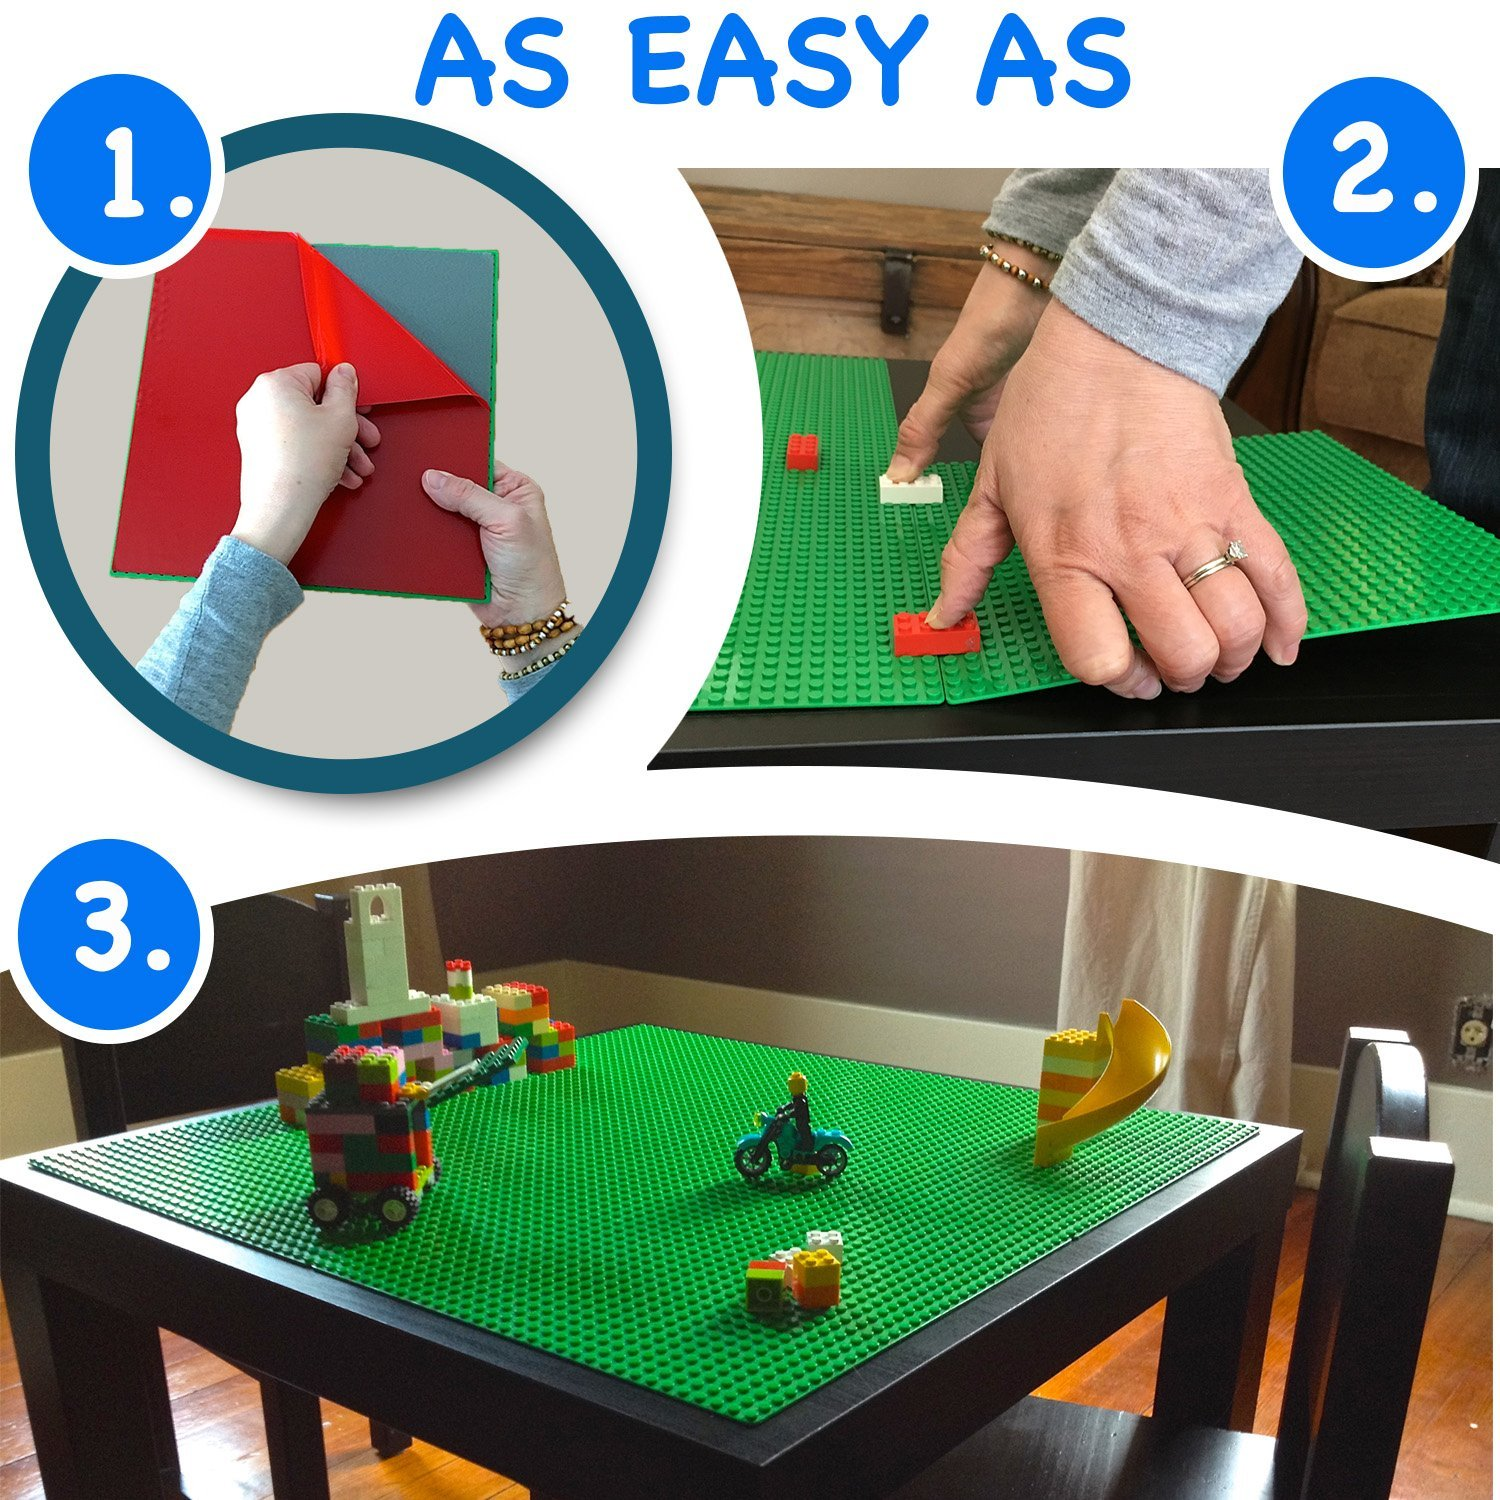 Peel-and-Stick LEGO Baseplates 4 Pack Only $29.95! (Great For a LEGO Table!)